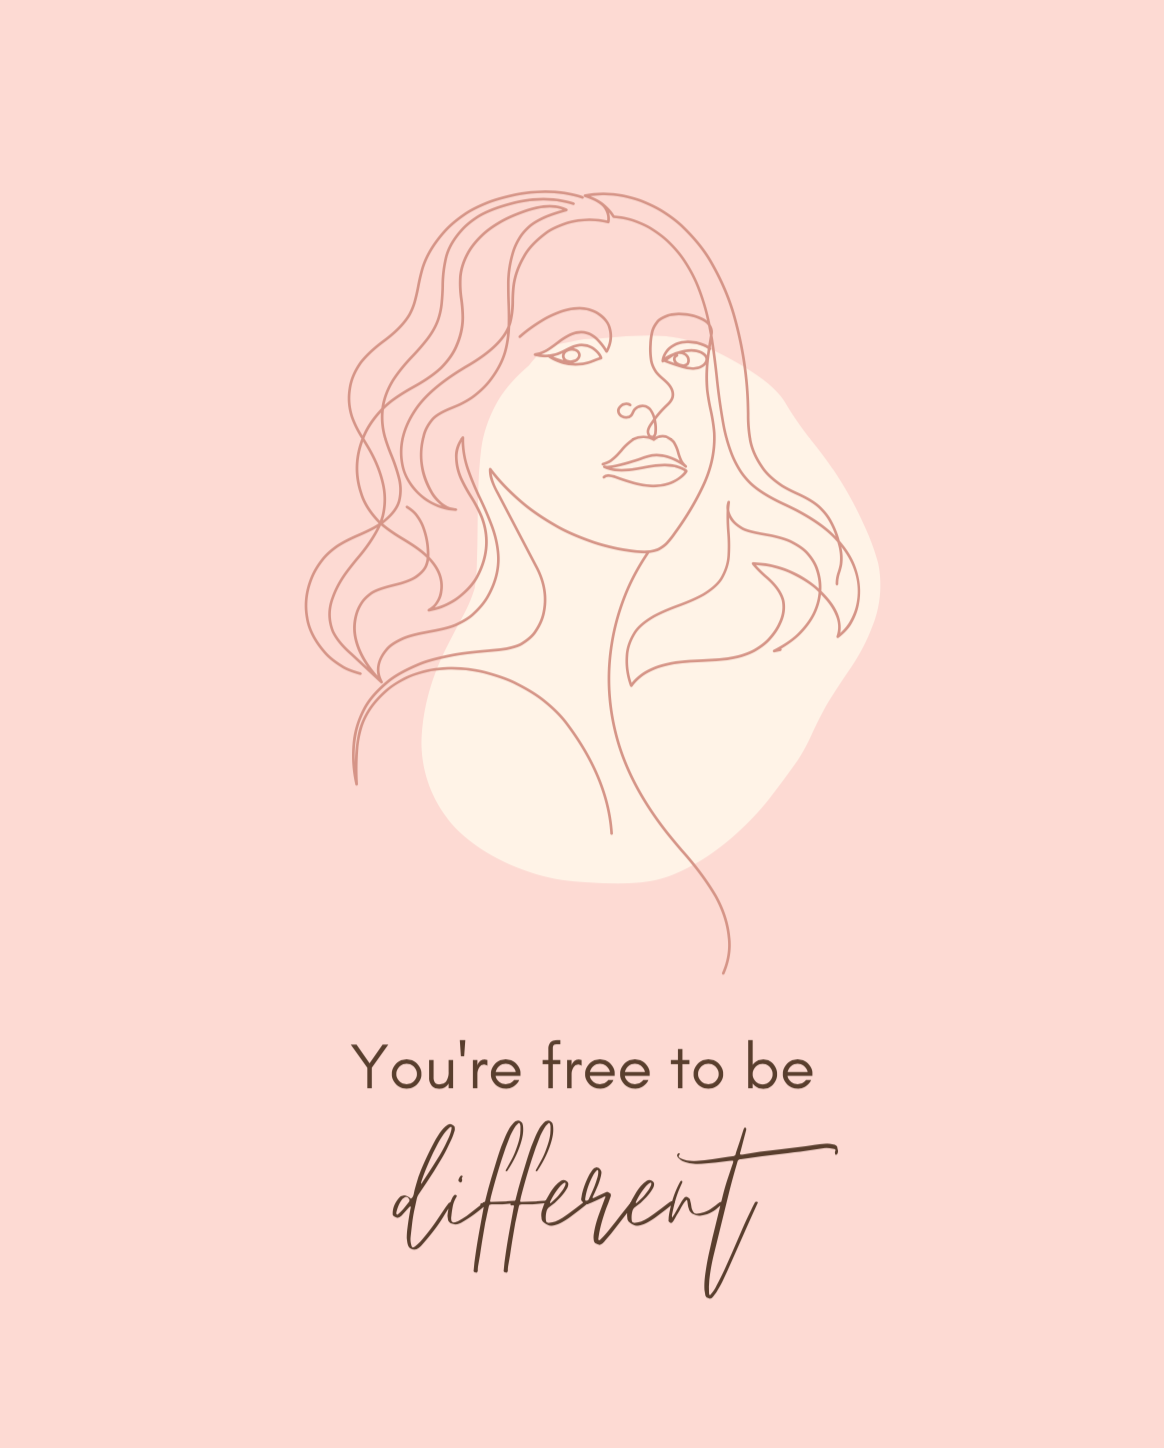 Be different - Printable